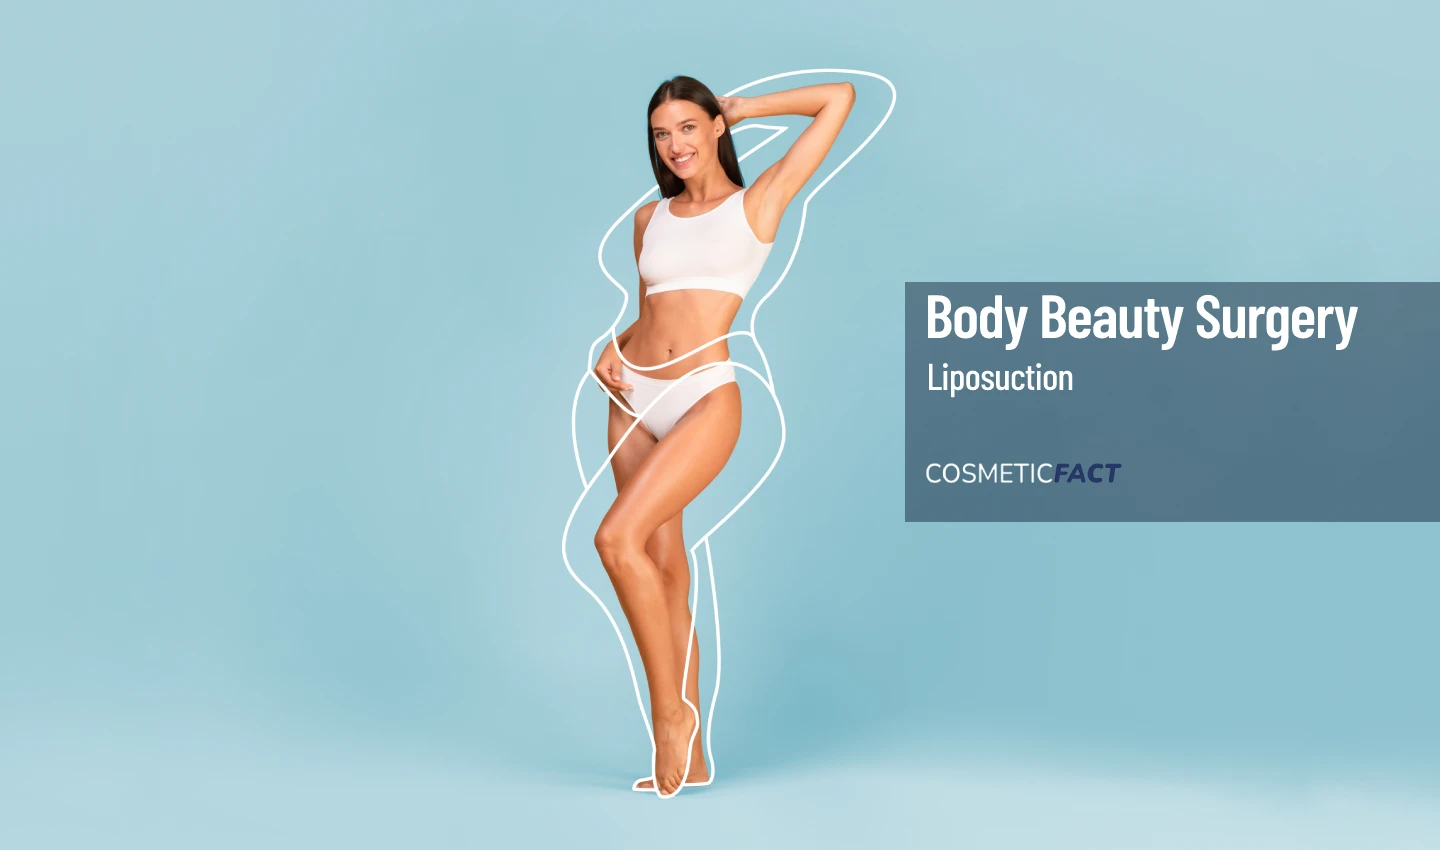 A woman with a beautiful style and body representing the results of the liposuction procedure.